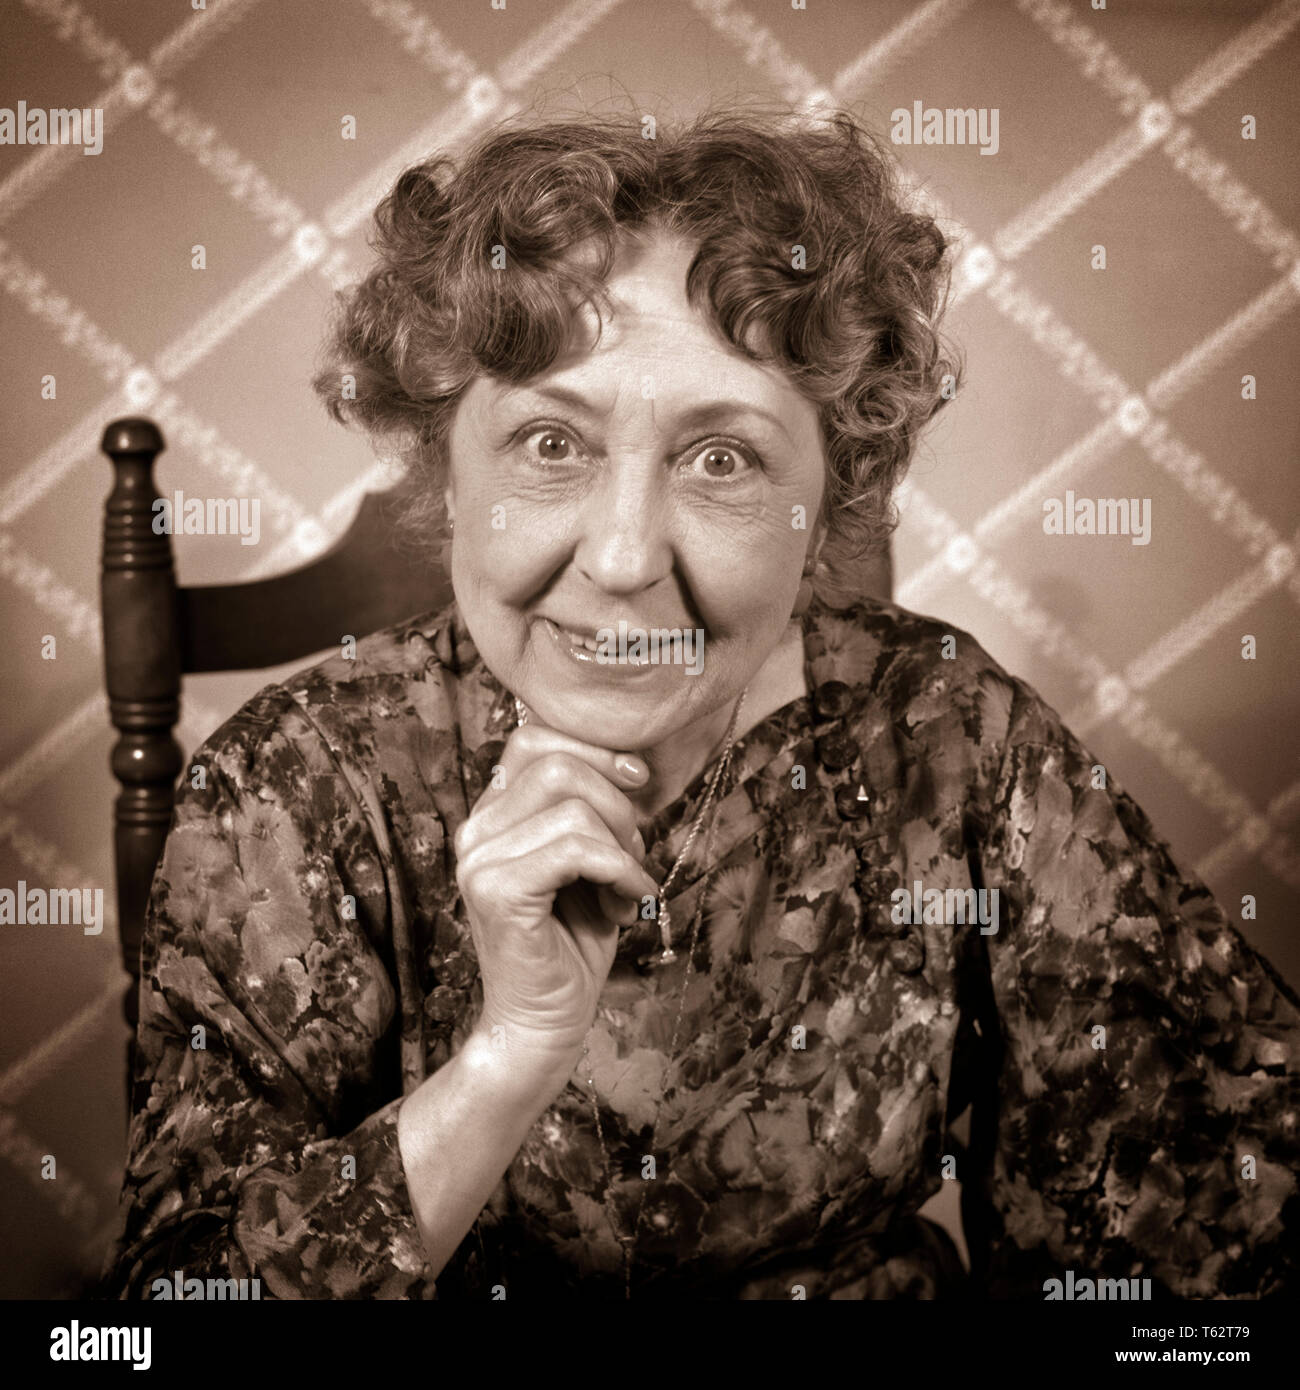 1930s-1940s-enthusiastic-elderly-woman-smiling-looking-at-camera-with-manic-eyes-and-facial-expression-c3208-har001-hars-copy-space-half-length-ladies-persons-expressions-middle-aged-bw-eye-contact-bizarre-humorous-happiness-middle-aged-woman-weird-oldsters-cheerful-oldster-and-excitement-zany-comical-enthusiastic-smiles-elders-comedy-joyful-wacky-wide-eyed-idiosyncratic-amusing-cooperation-eager-eccentric-intense-manic-big-eyes-black-and-white-caucasian-ethnicity-crazy-erratic-har001-old-fashioned-outrageous-T62T79.jpg